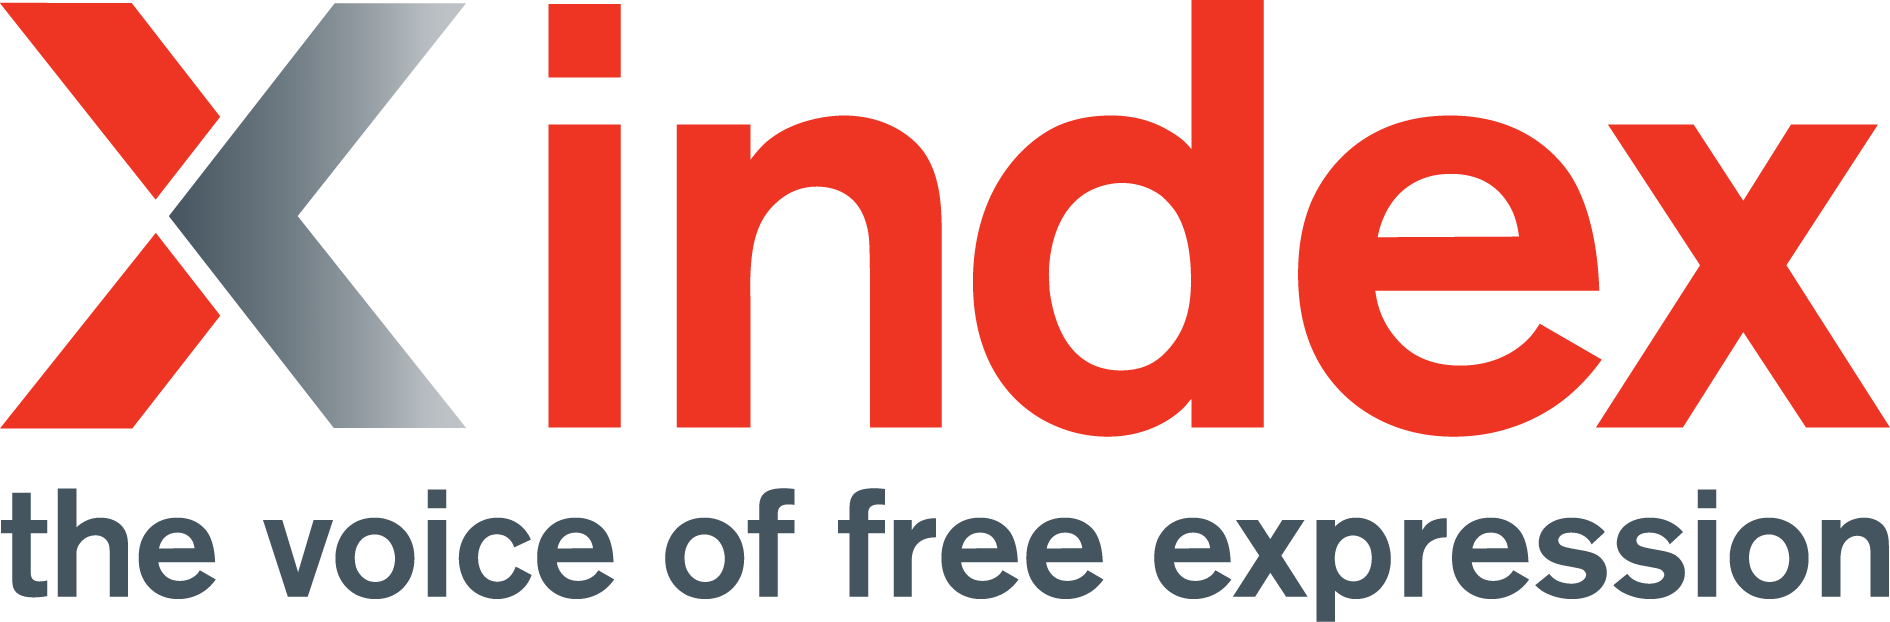 Index - The Voice of Free Expression